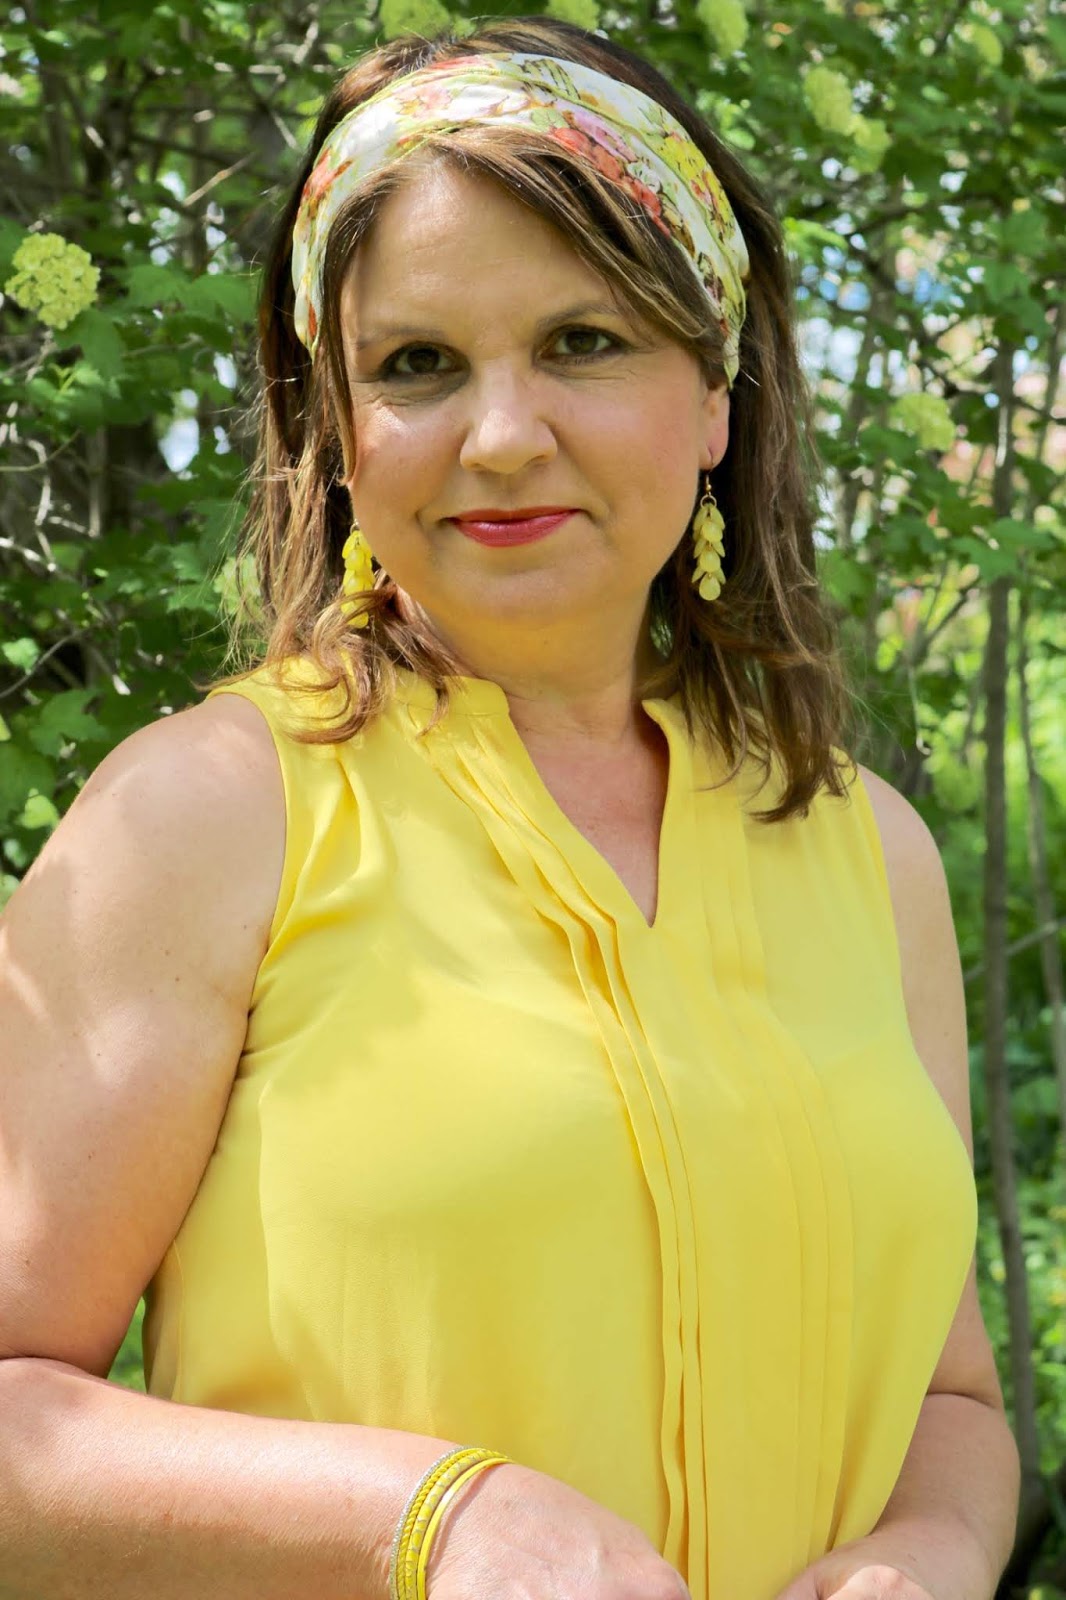 Amy's Creative Pursuits: A Bright Yellow Top with Pastel Blue